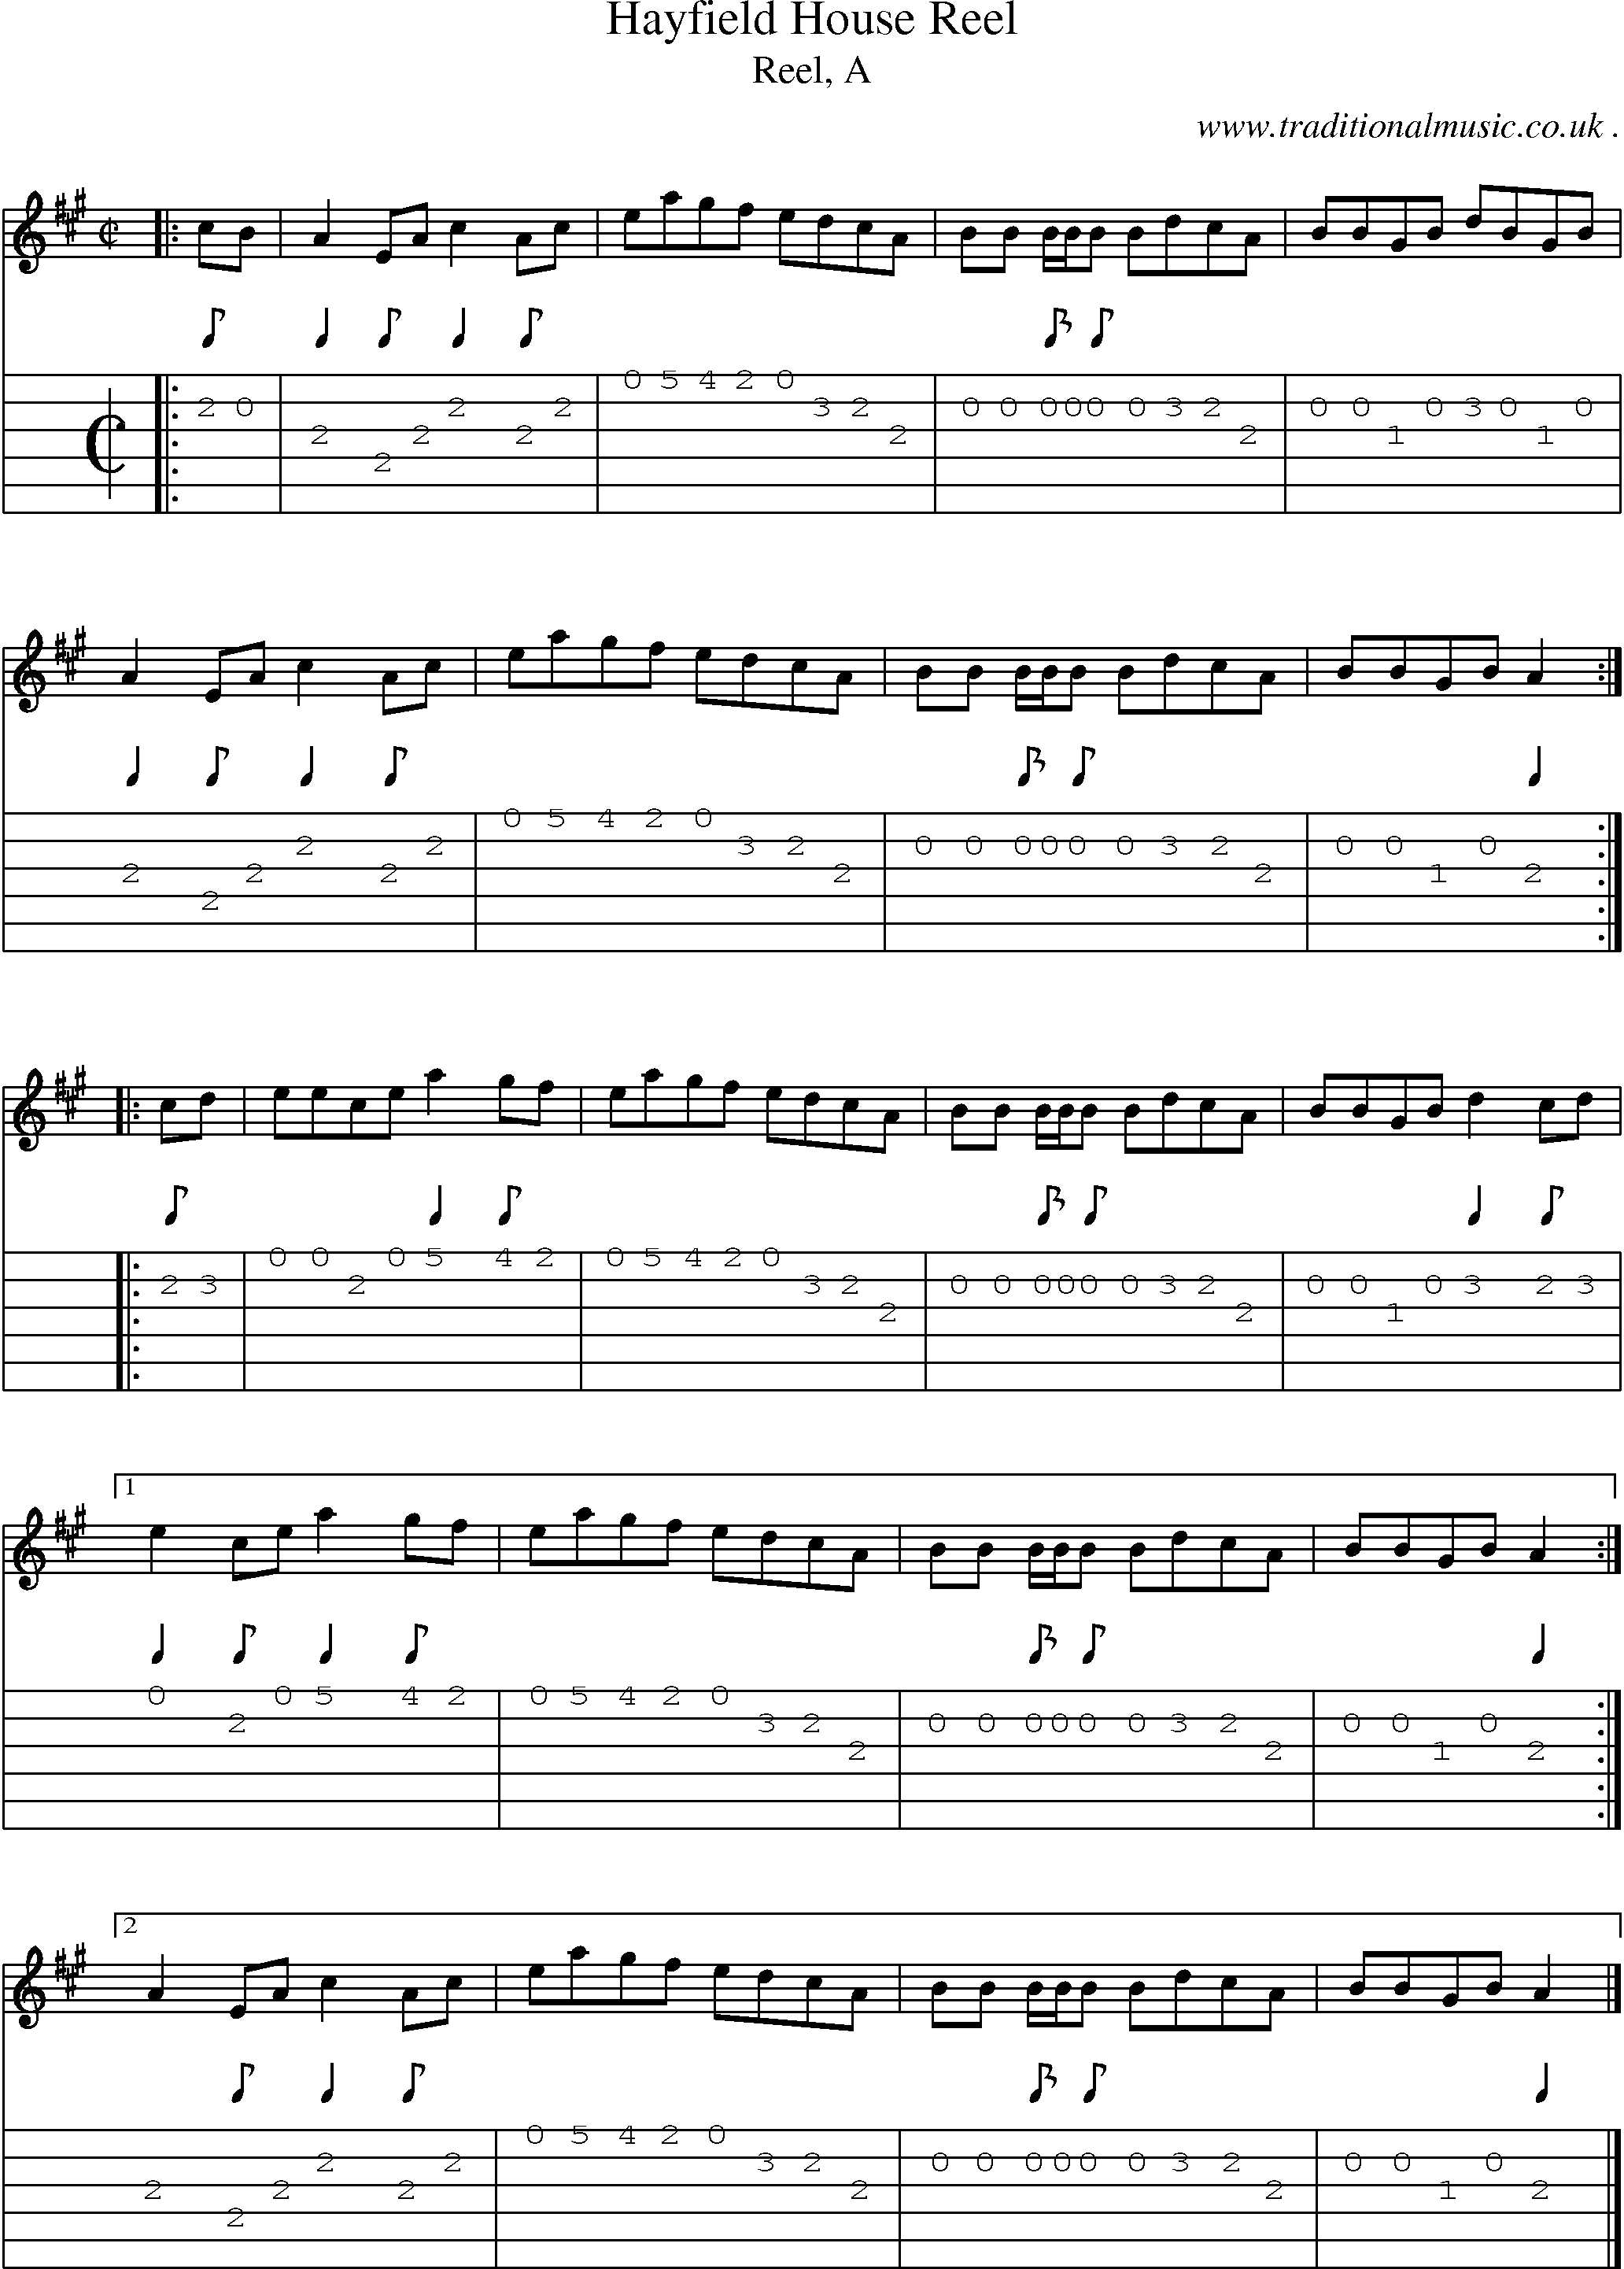 Sheet-music  score, Chords and Guitar Tabs for Hayfield House Reel